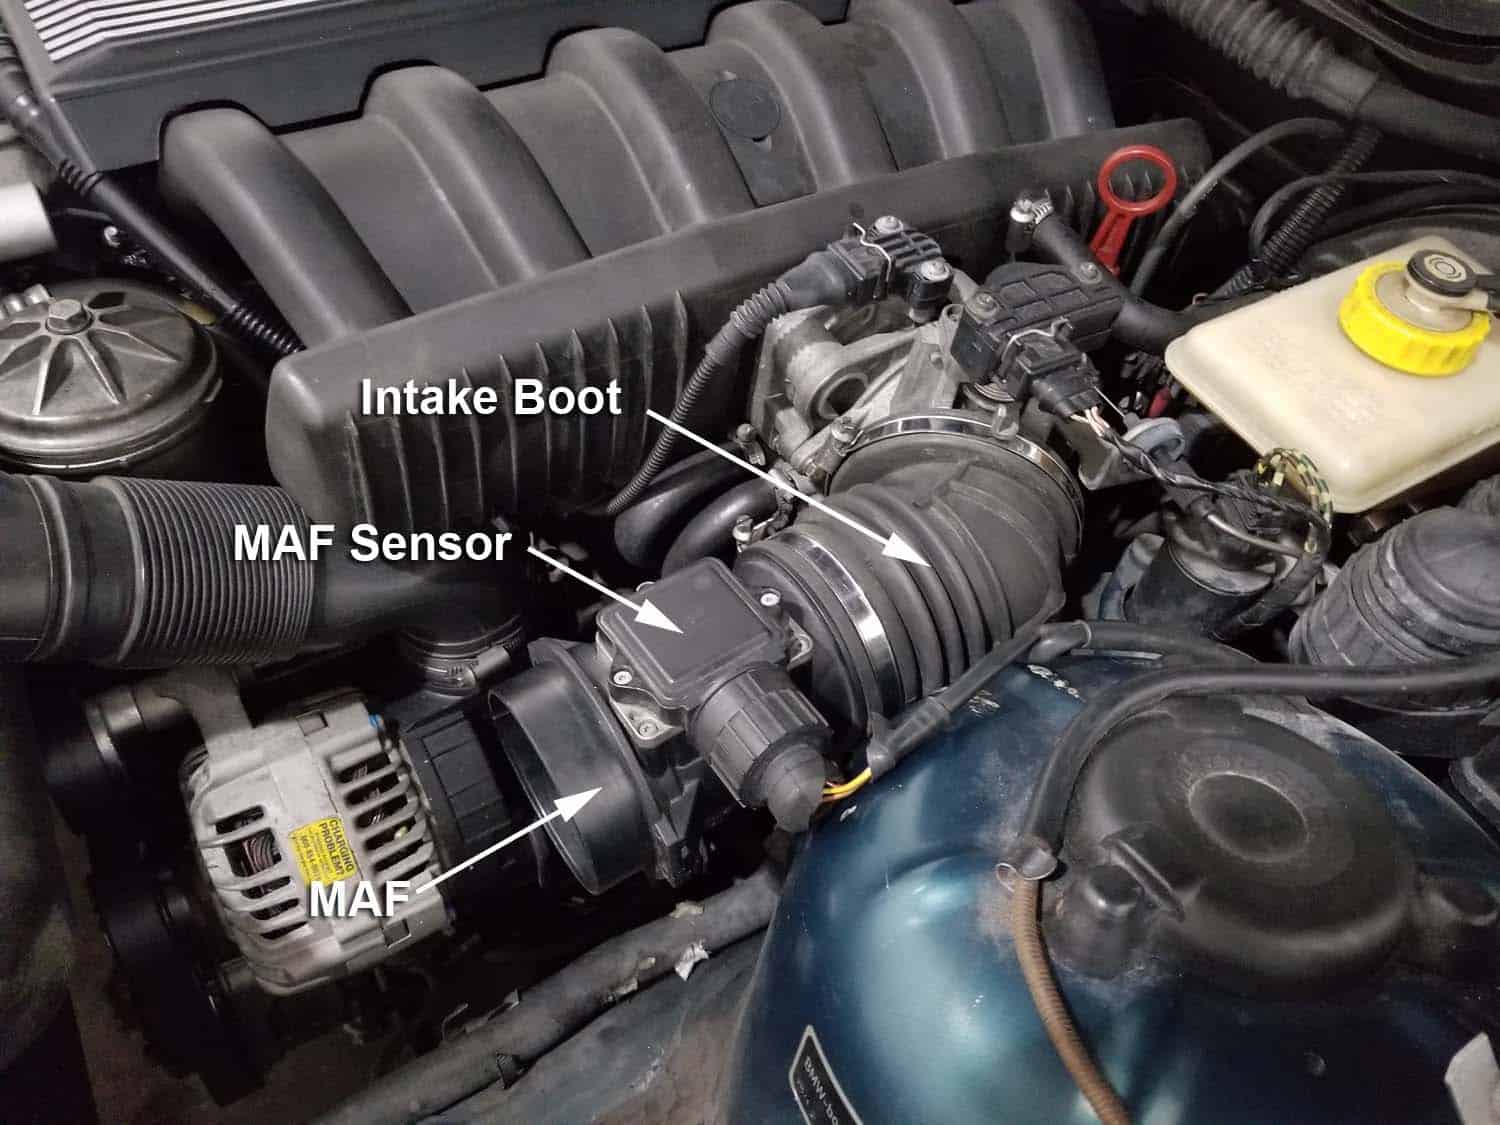 BMW E36 cold air intake - remove factory intake boot